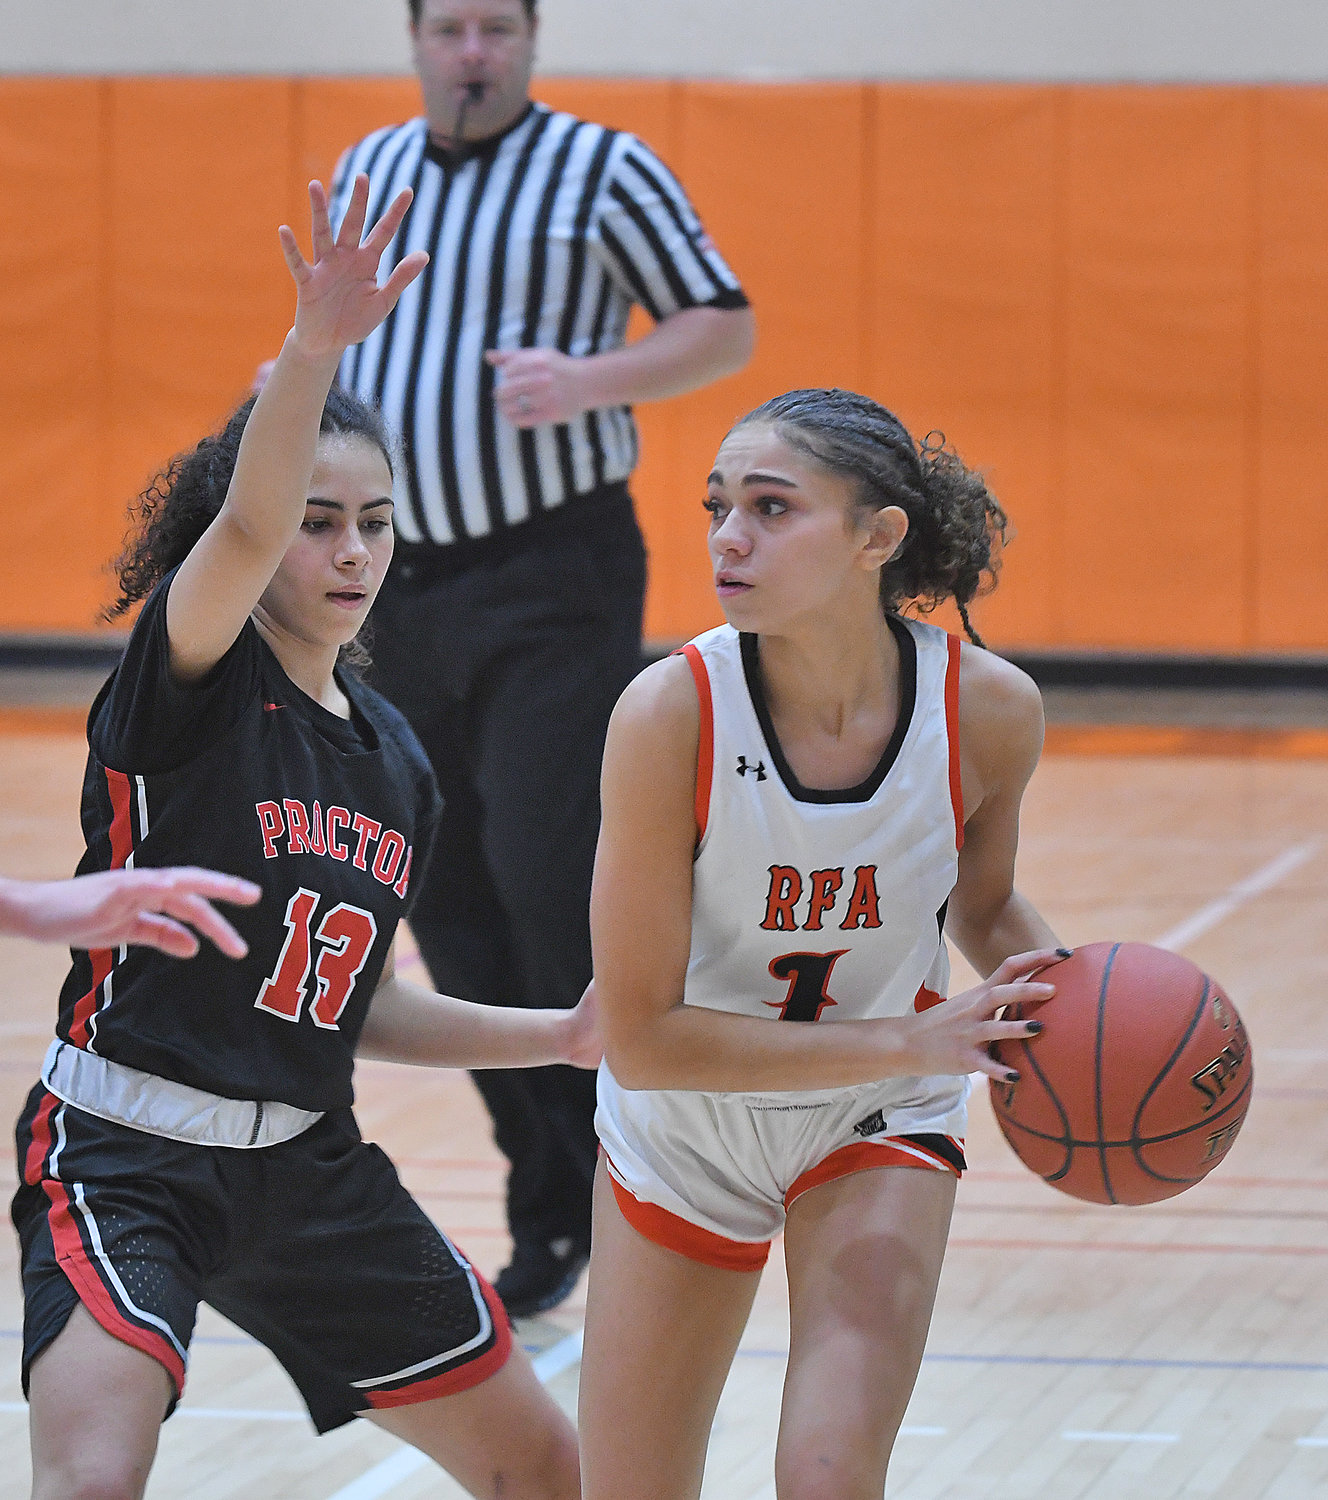 Alysa Jackson of Rome Free Academy looks over the court with Proctor’s Lleneila Rodriguez defending Saturday at RFA. Jackson had a game-high 22 points in RFA’s 66-34 win.